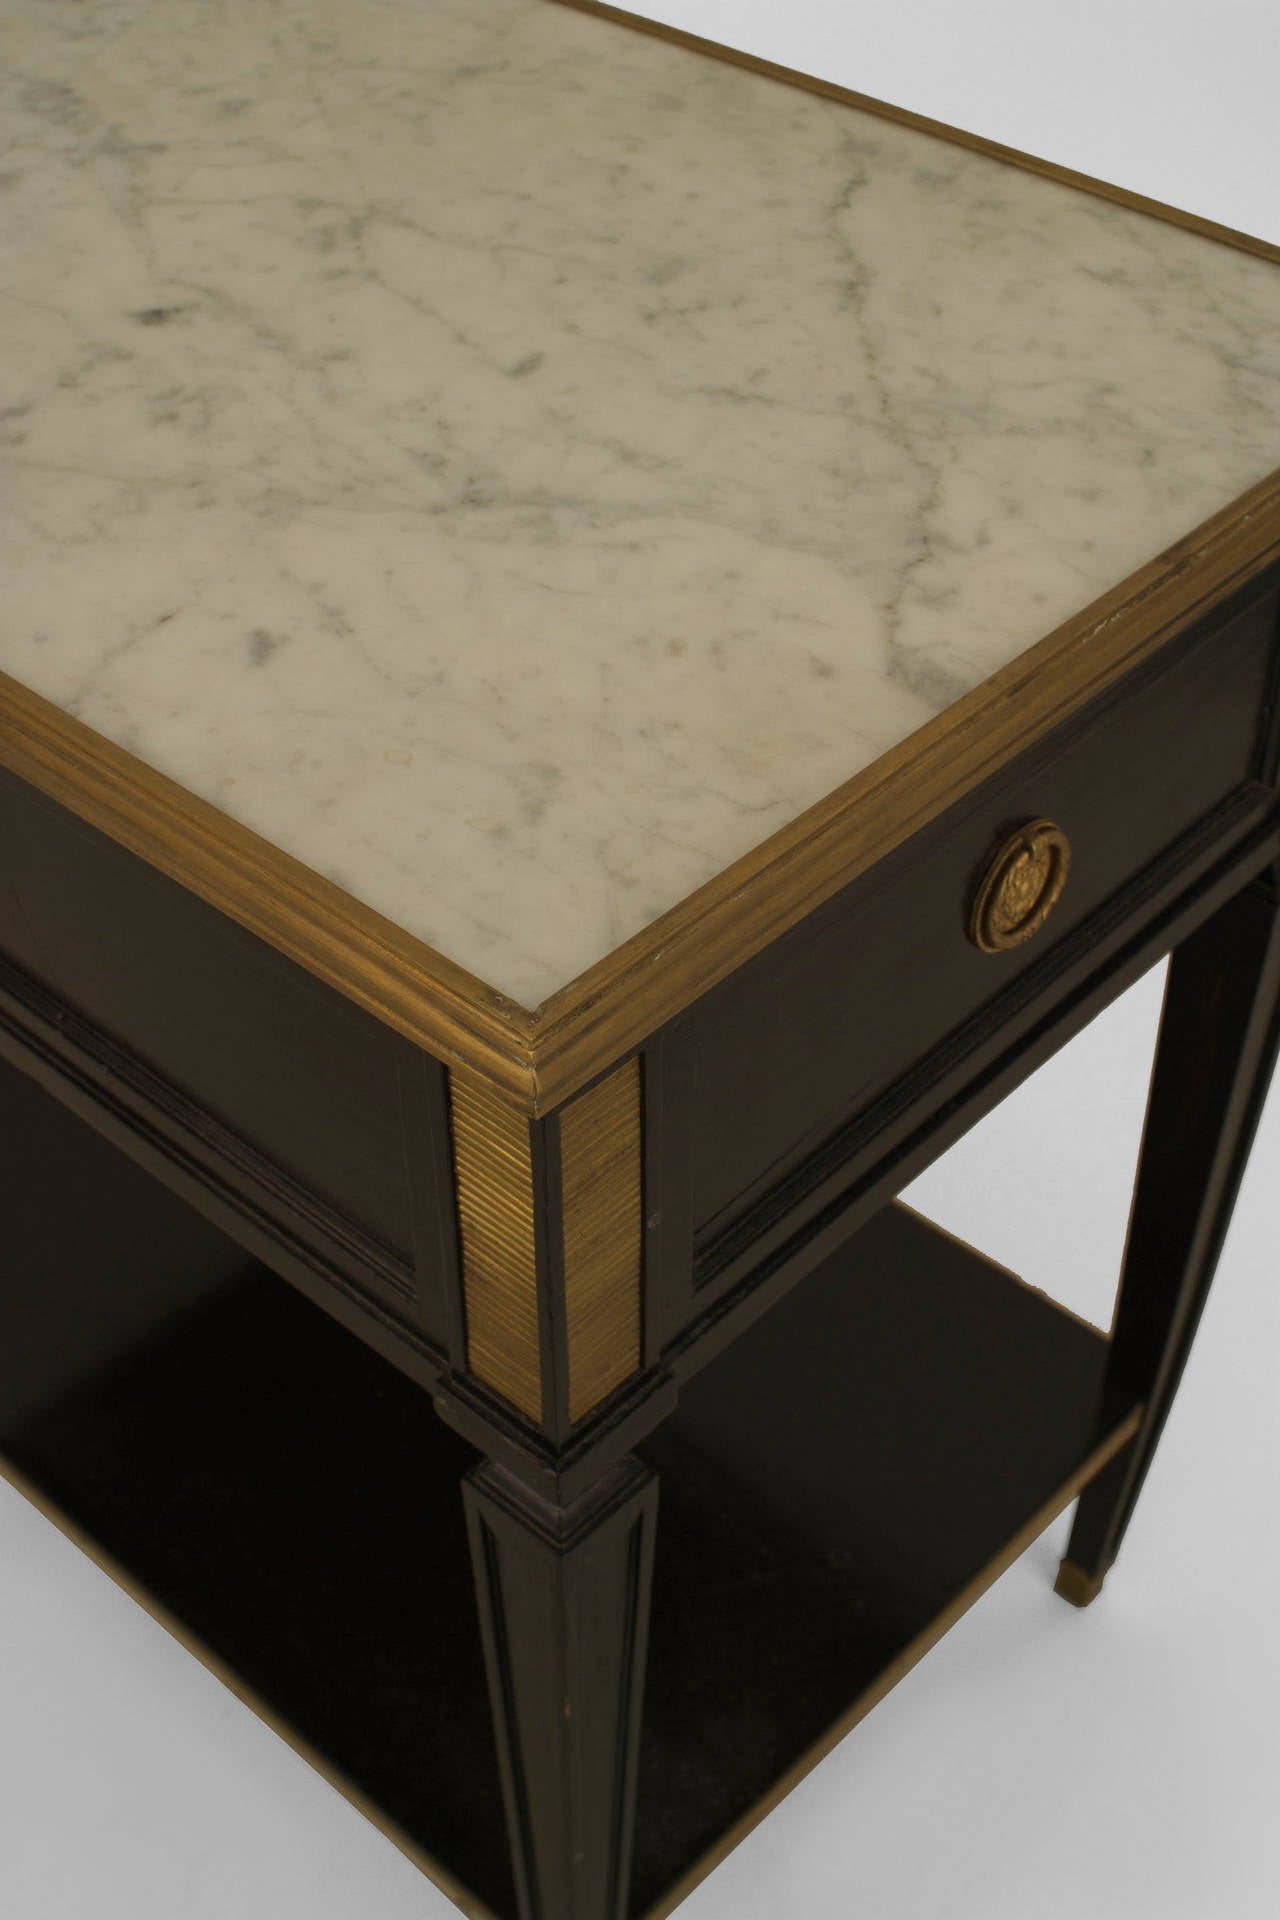 Pair of French 1940s (Louis XVI style) ebonized and bronze trimmed
rectangular end tables with small shelf stretcher and an inset white marble top above a drawer (stamped: JANSEN).